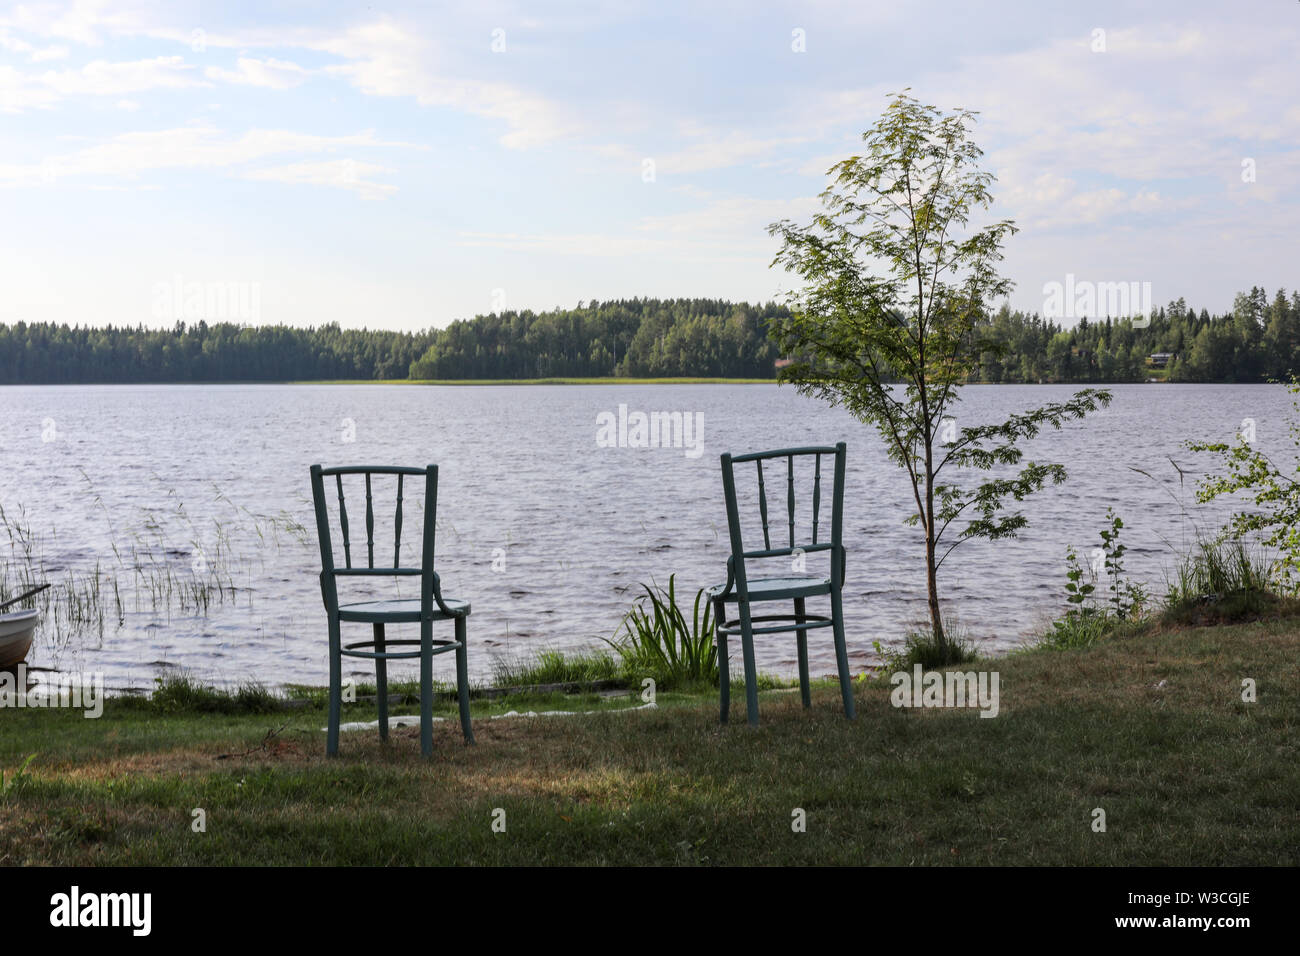 Two chairs by the lake Ainesjärvi in Ylöjärvi, Finland Stock Photo